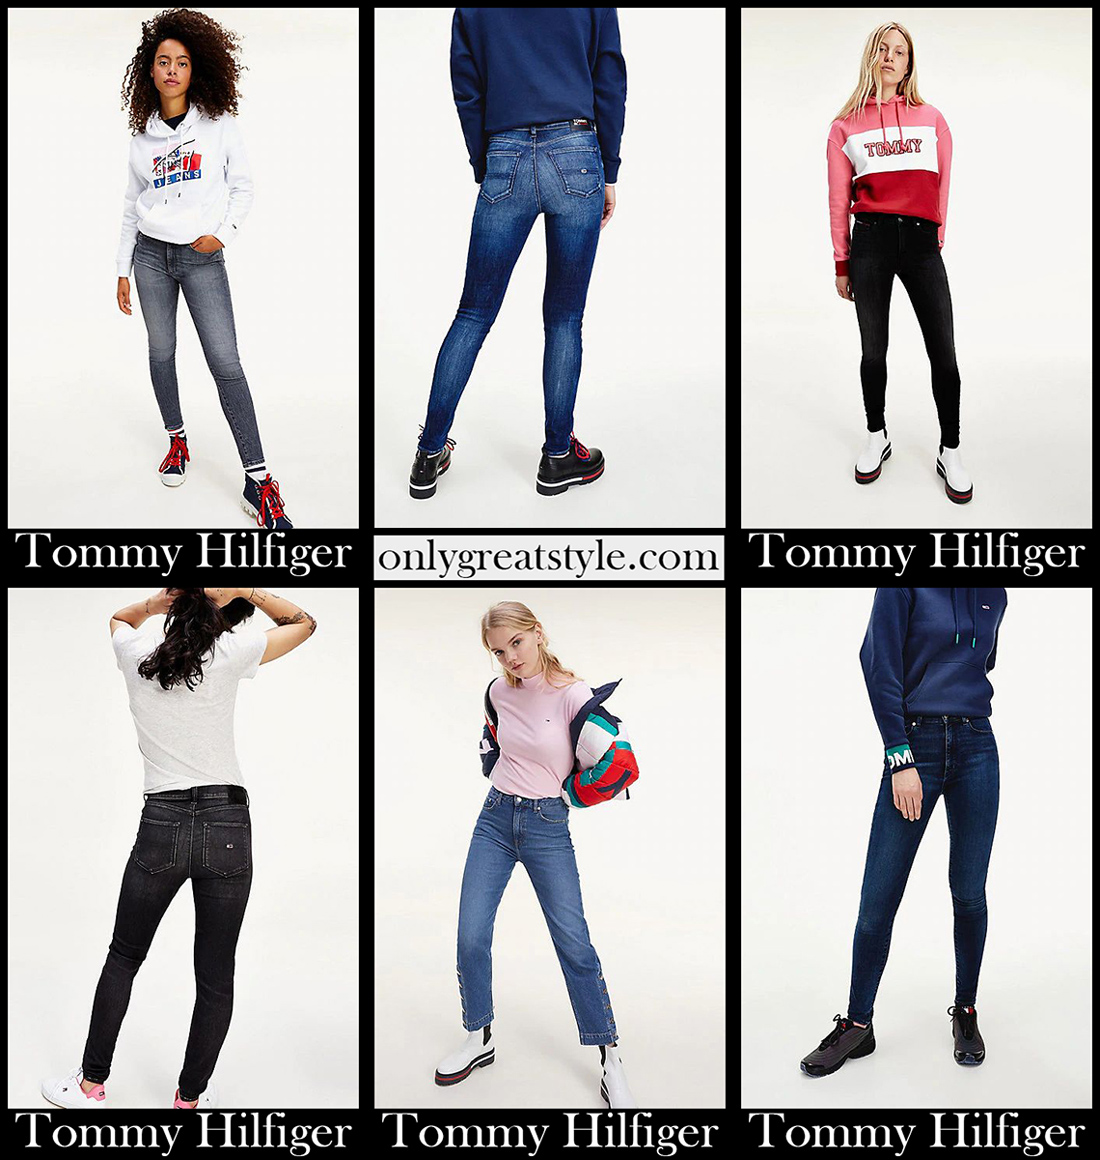 hilfiger new collection